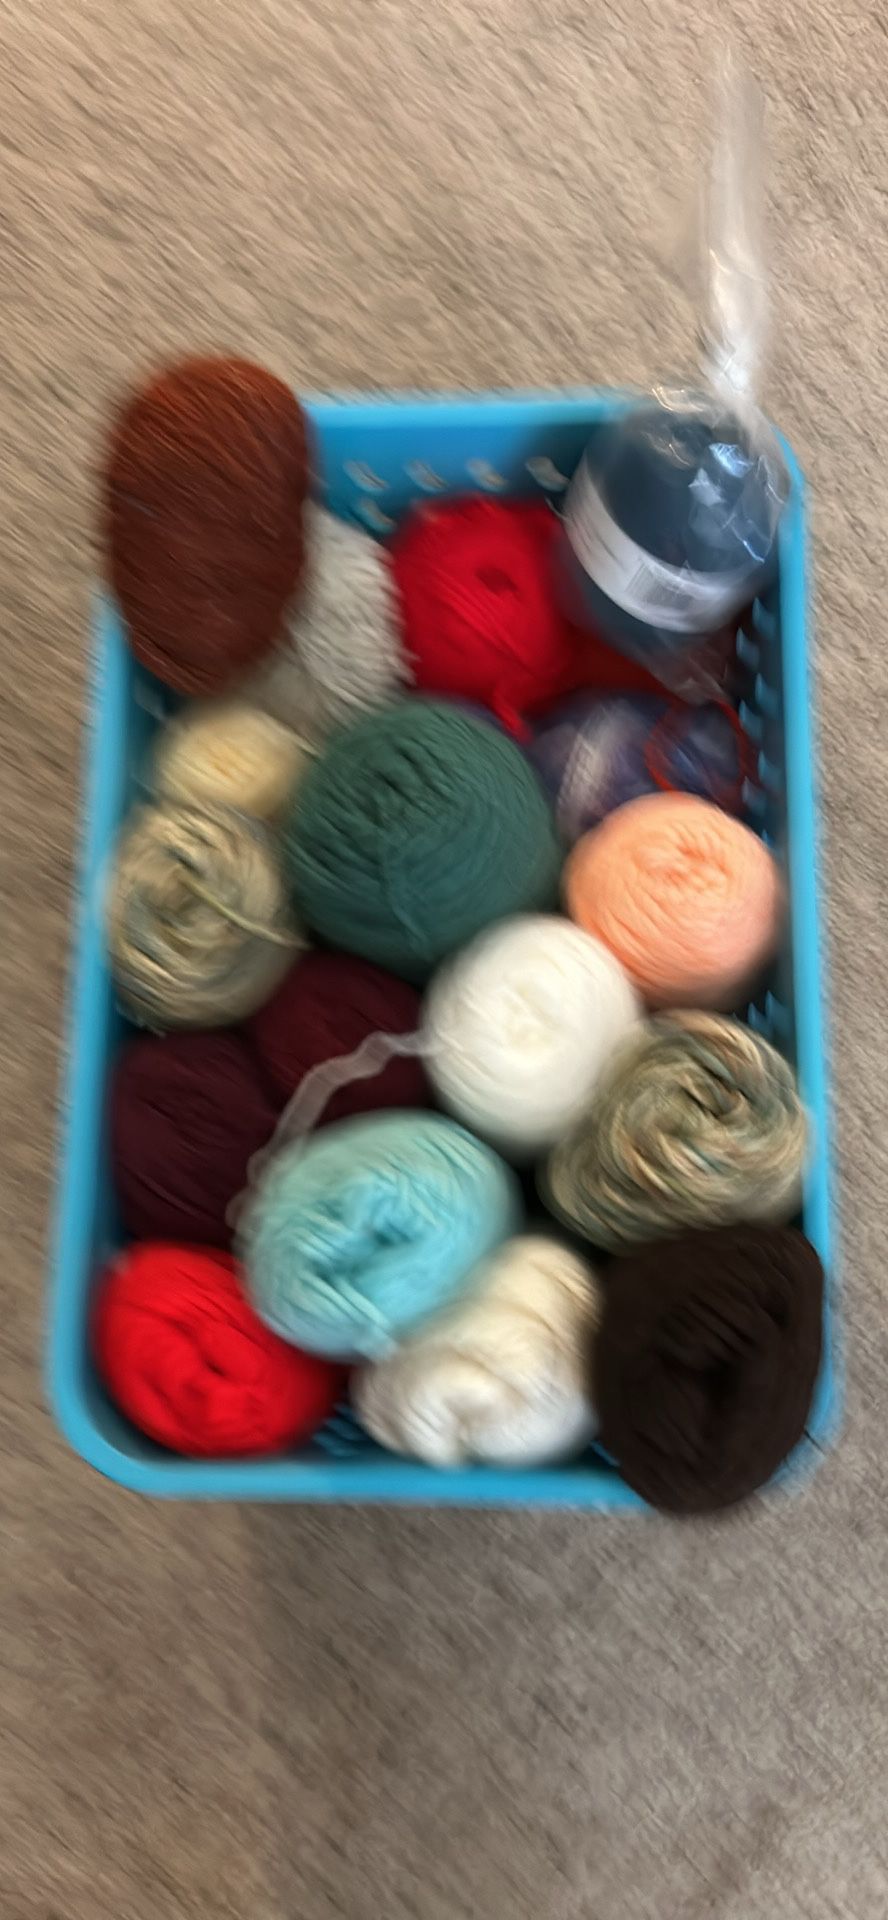 Crate Filled With Yarn 